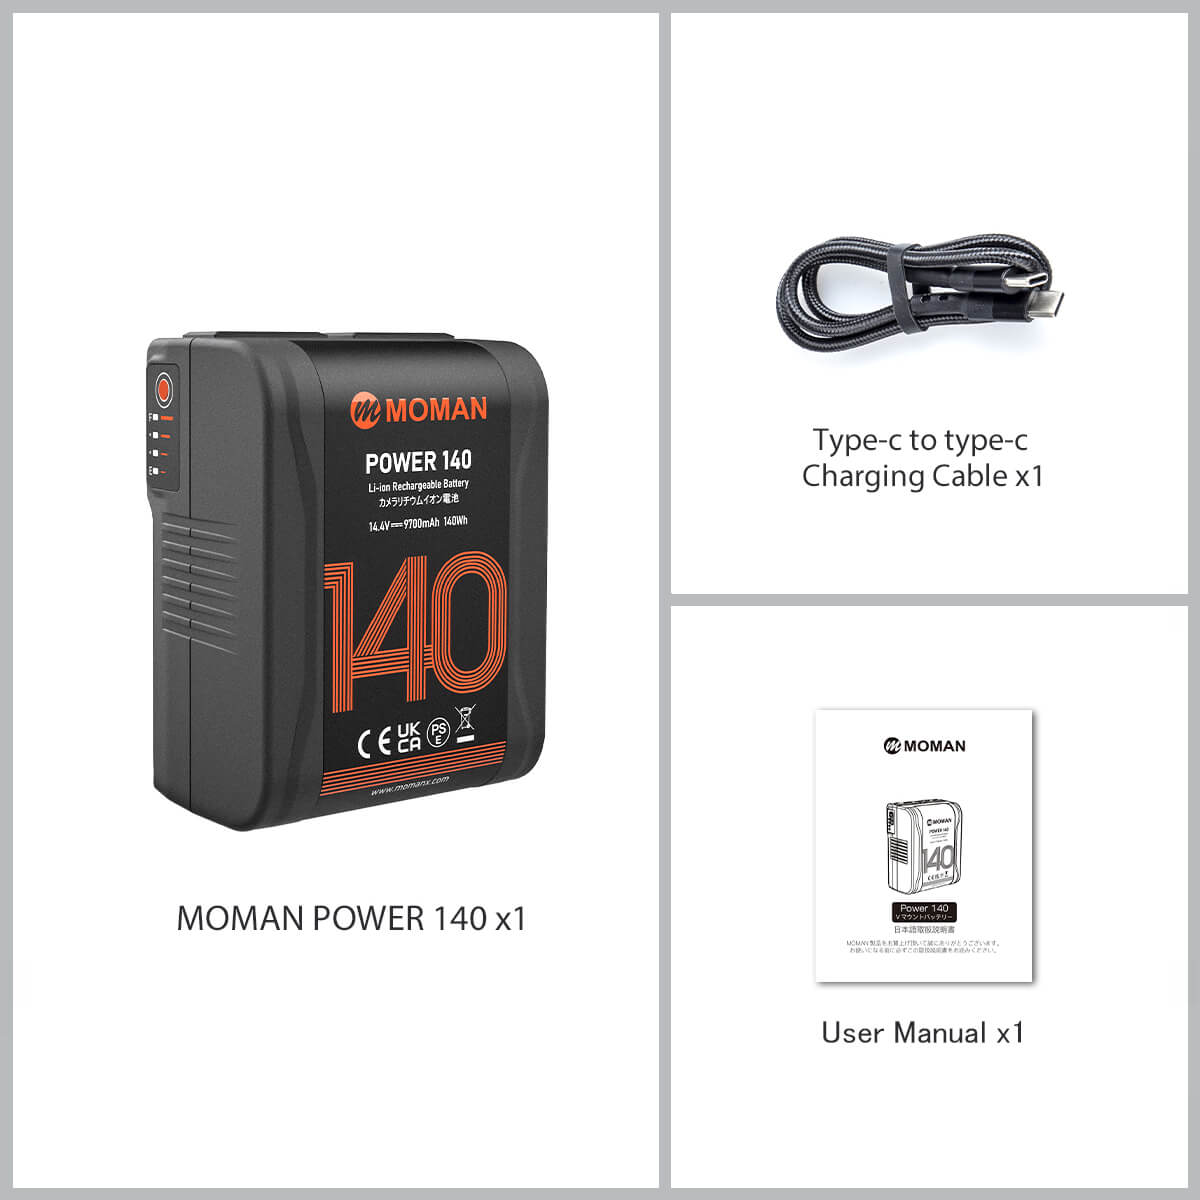 Moman Power 140 package list: 140Wh v-mount battery, a Type-C to Type-C charging cable, and a User Manual.